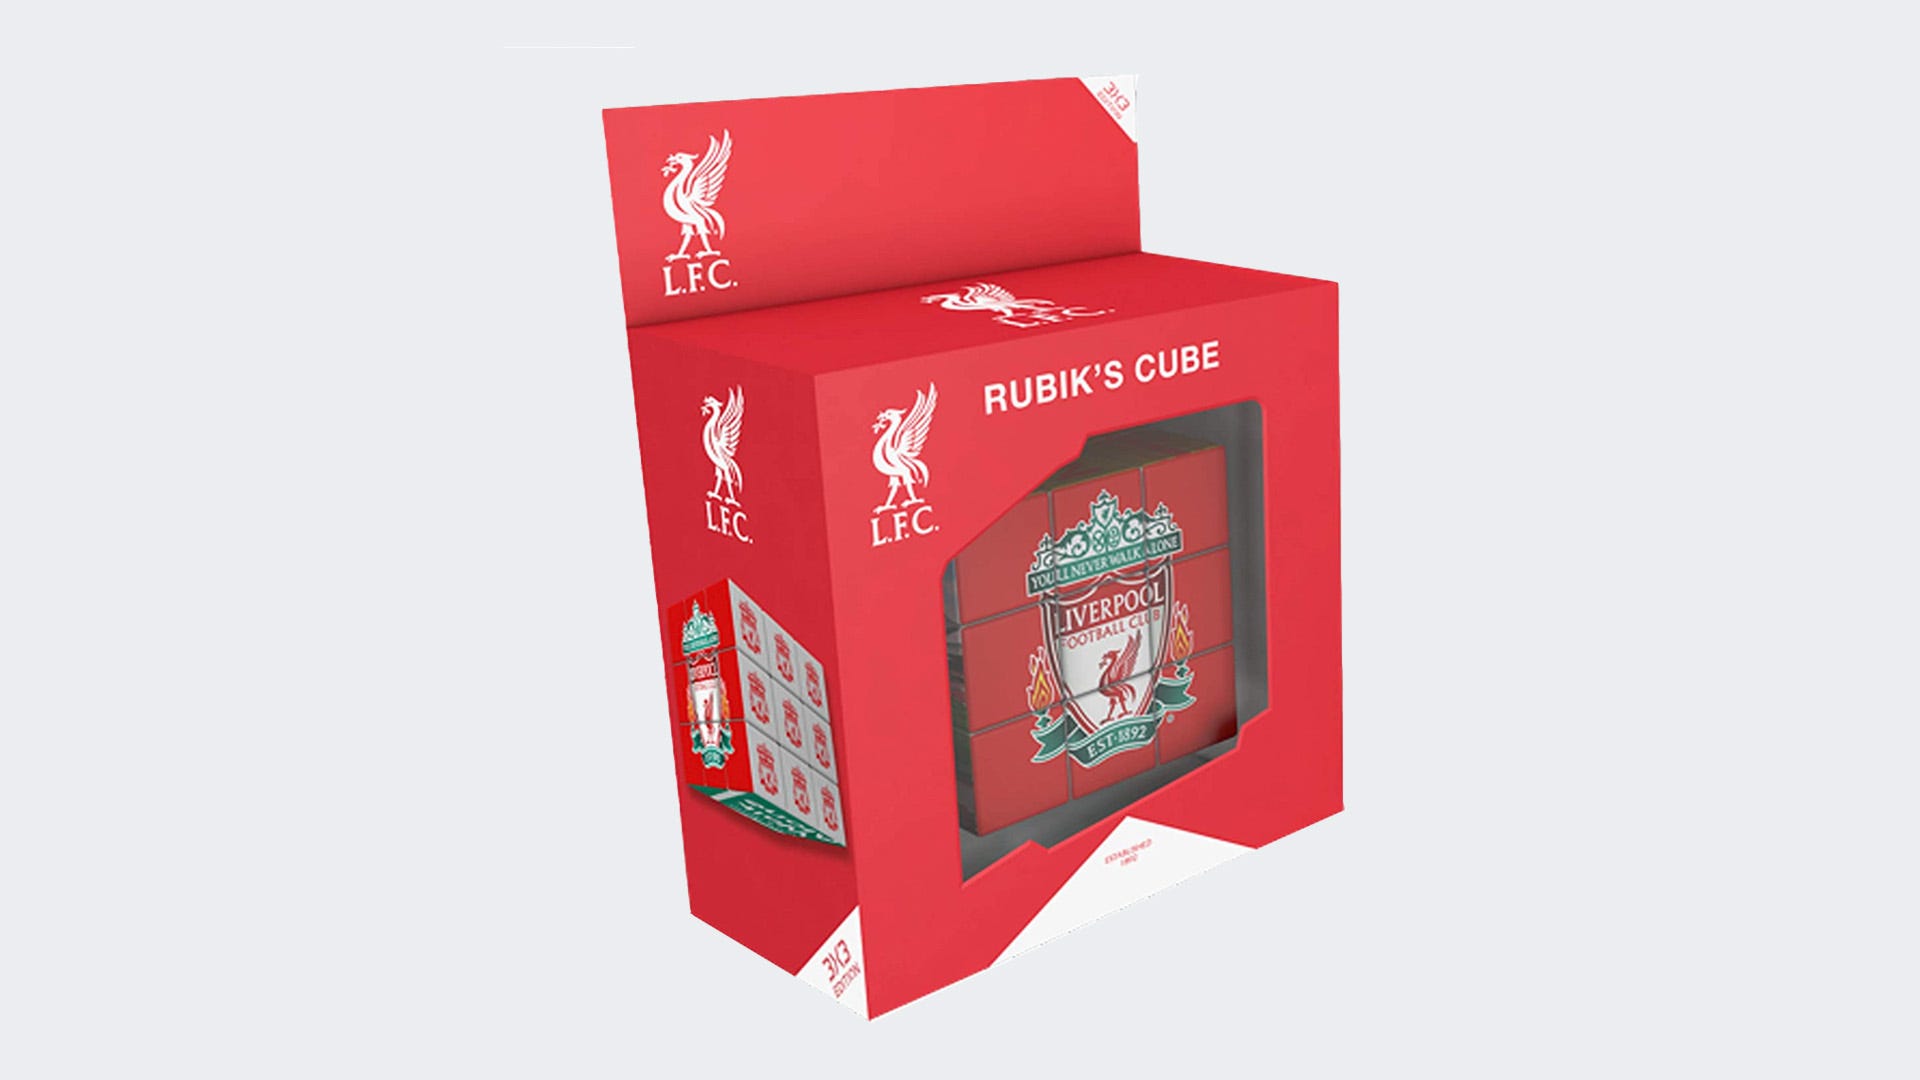 Rubiks Cube Liverpool FC Football Challenging Logic Puzzle Fun Training Game 